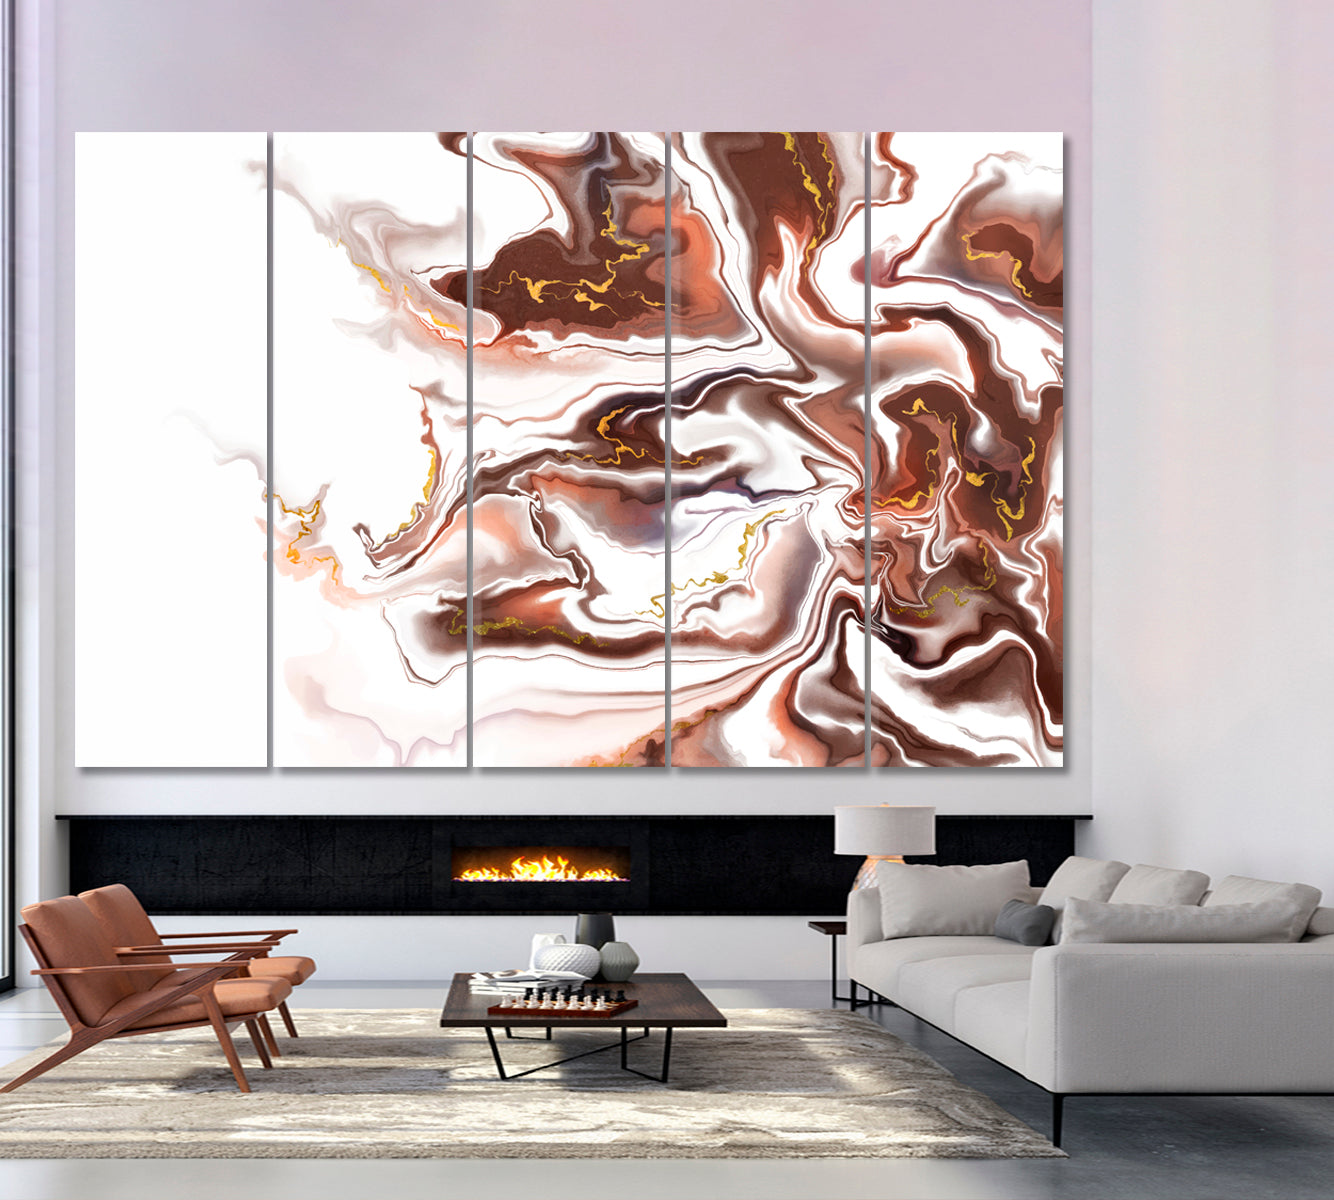 Brown Abstract Wavy Forms Futuristic Pattern Fluid Art, Oriental Marbling Canvas Print Artesty 5 panels 36" x 24" 